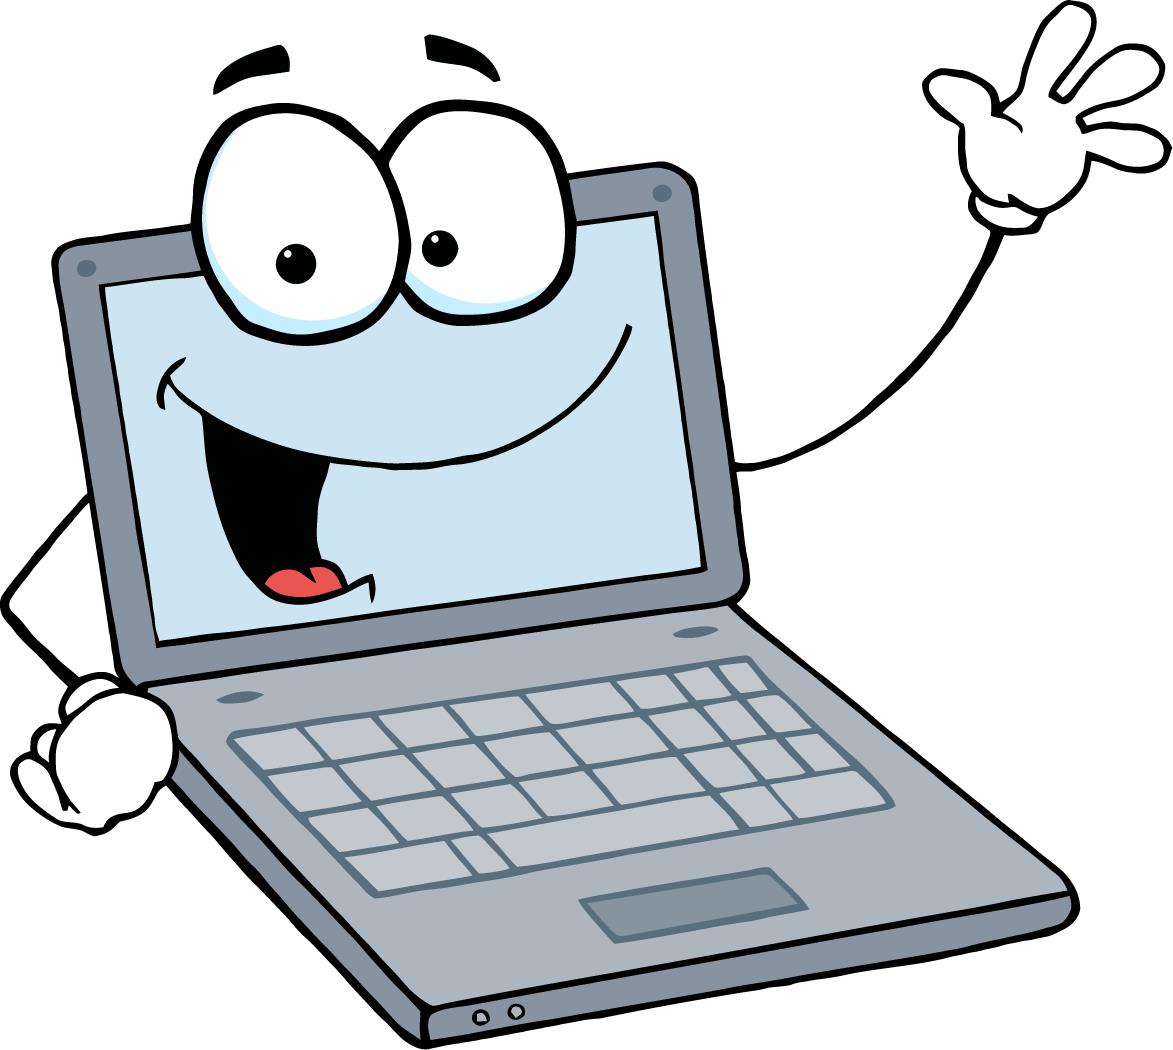 jpg_2033-Laptop-Cartoon-Character-Waving-A-Greeting - Small Business Solver